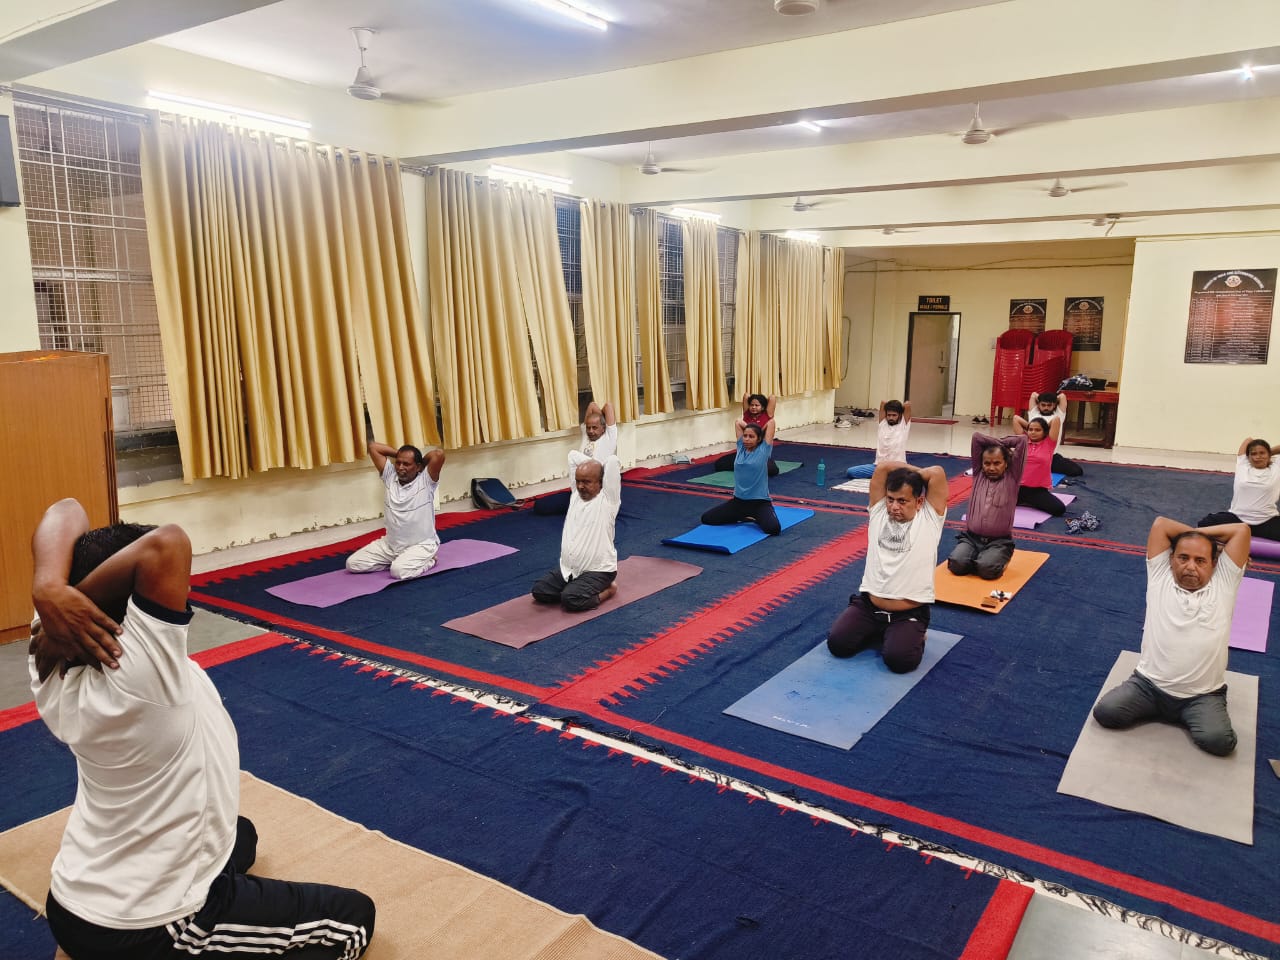 Under the auspices of Inter University Center for Yoga Sciences, Yoga Hall of Faculty organized a yoga practice camp